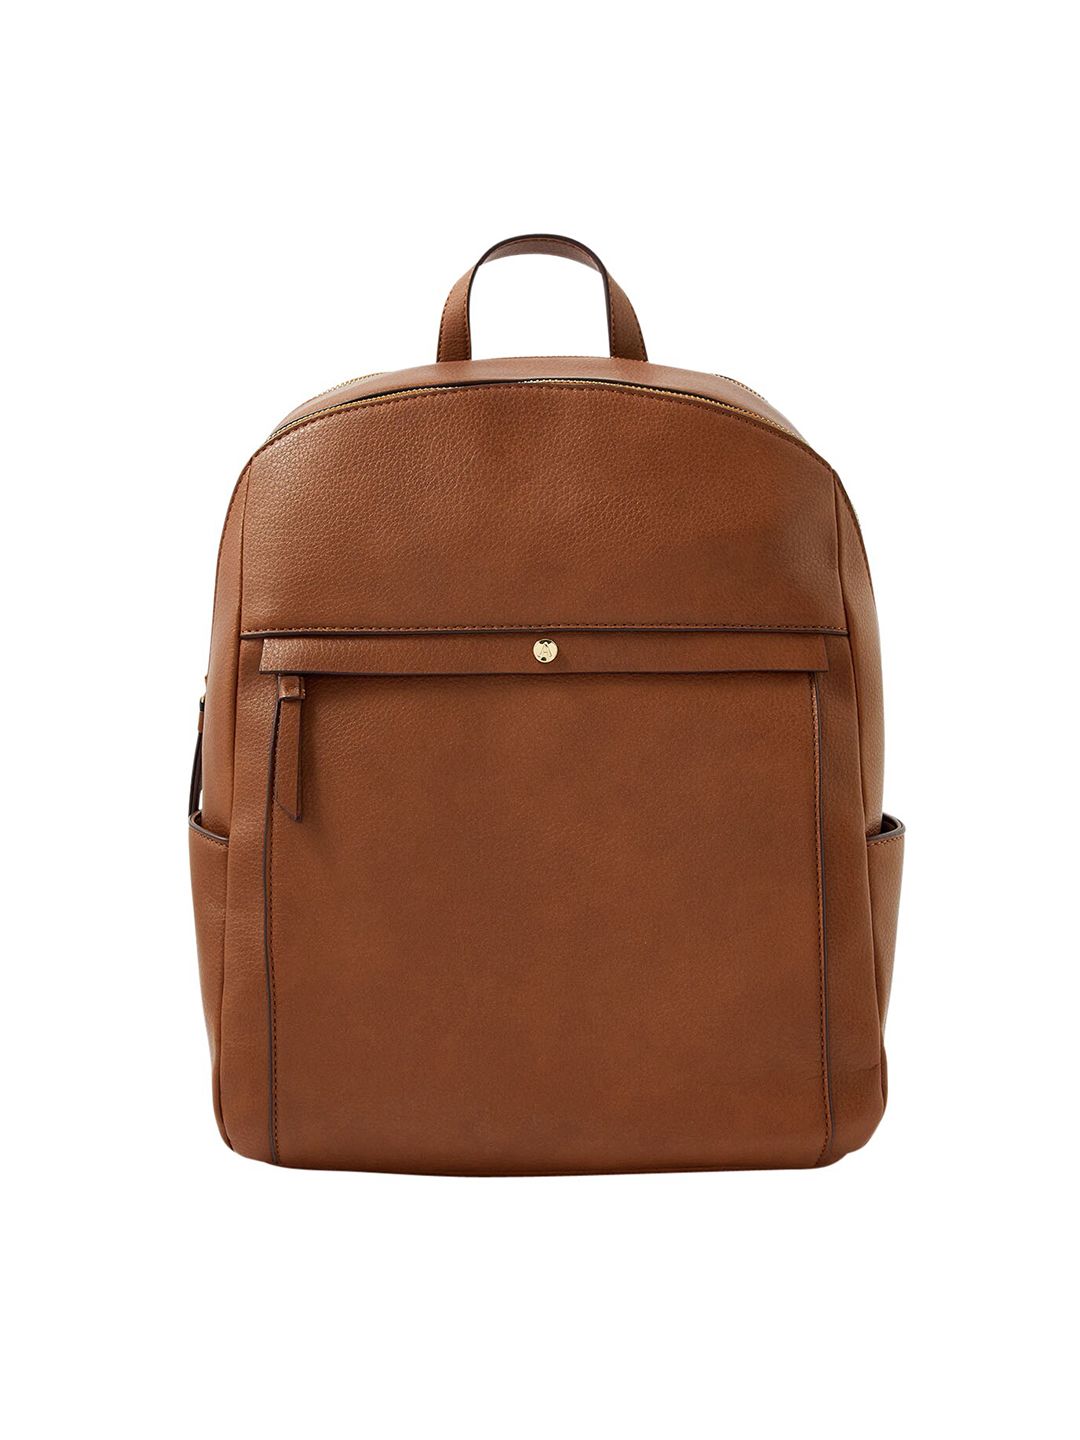 Accessorize Women Tan Backpack Price in India